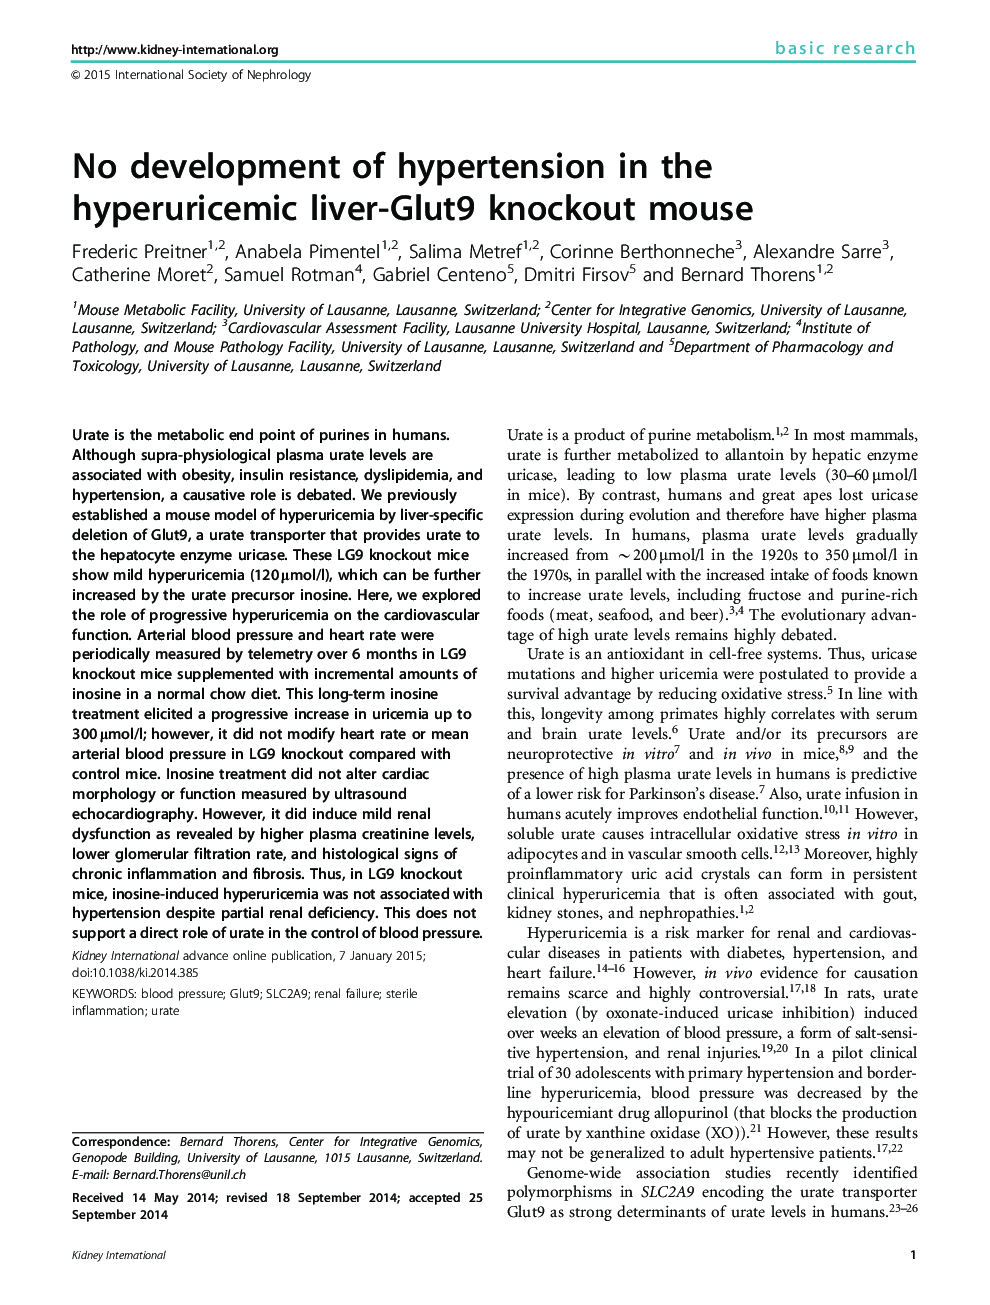 No development of hypertension in the hyperuricemic liver-Glut9 knockout mouse